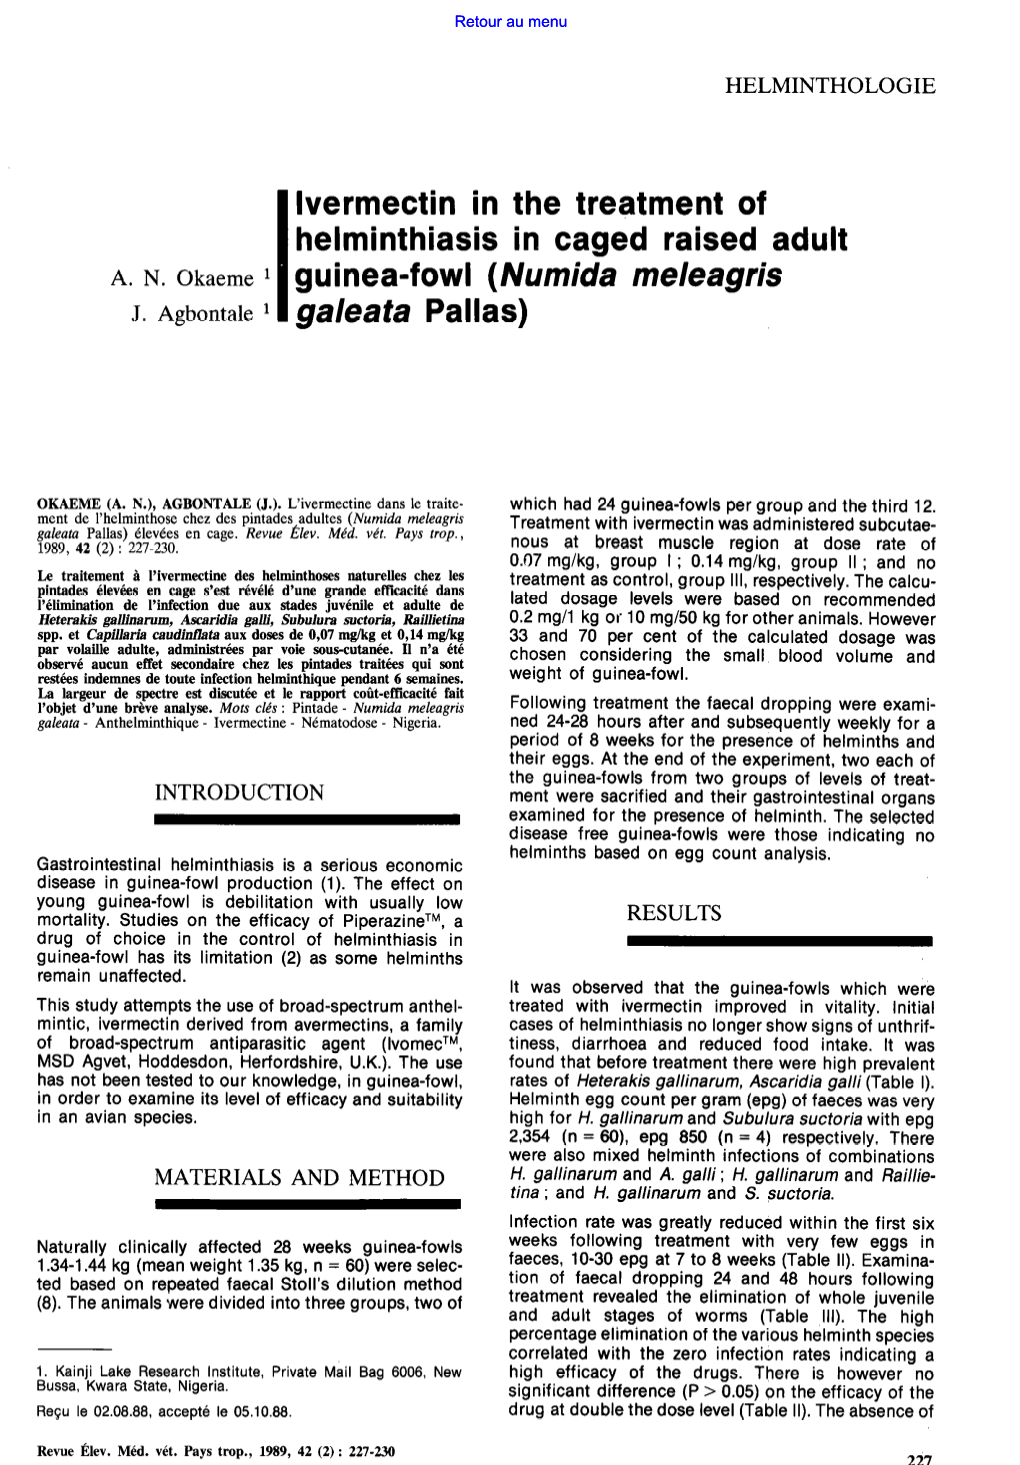 Ivermectin in the Treatment of Helminthiasis in Caged Raised Adult A